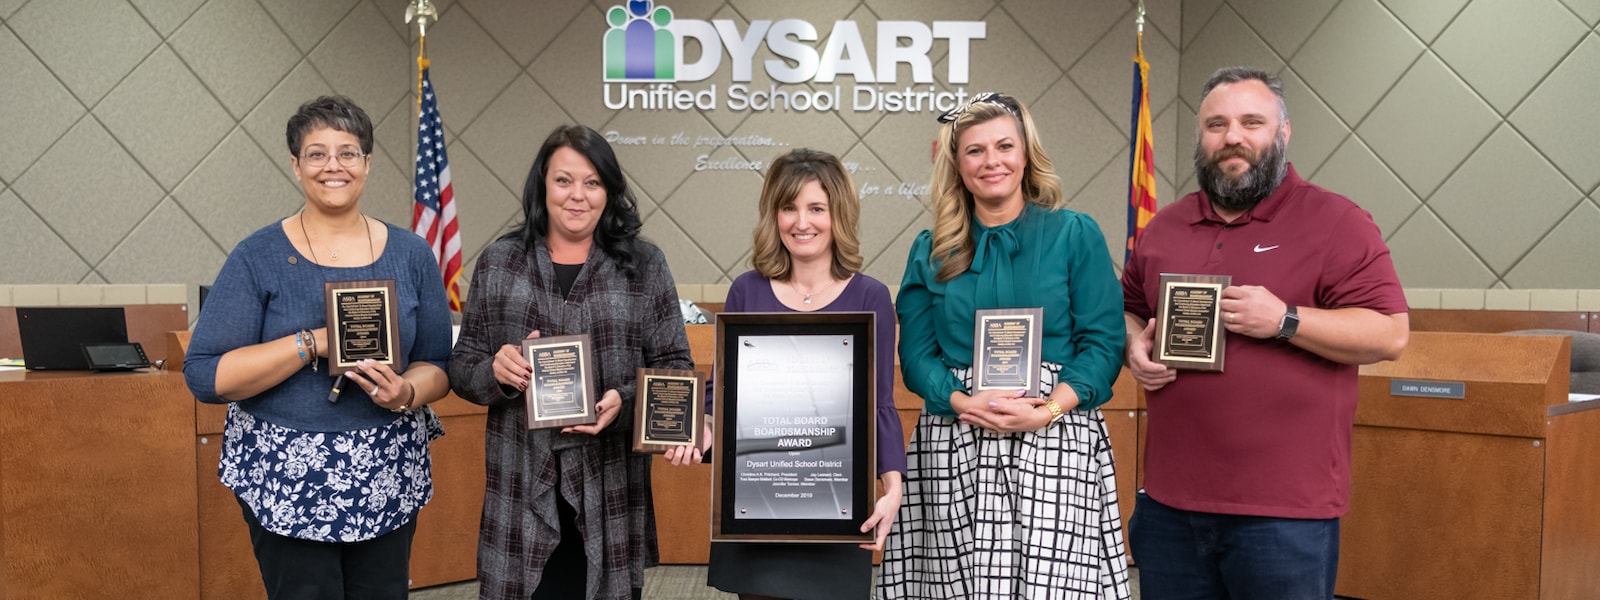 The Dysart District Governing board poses with their ASBA Total Boardmanship Award.